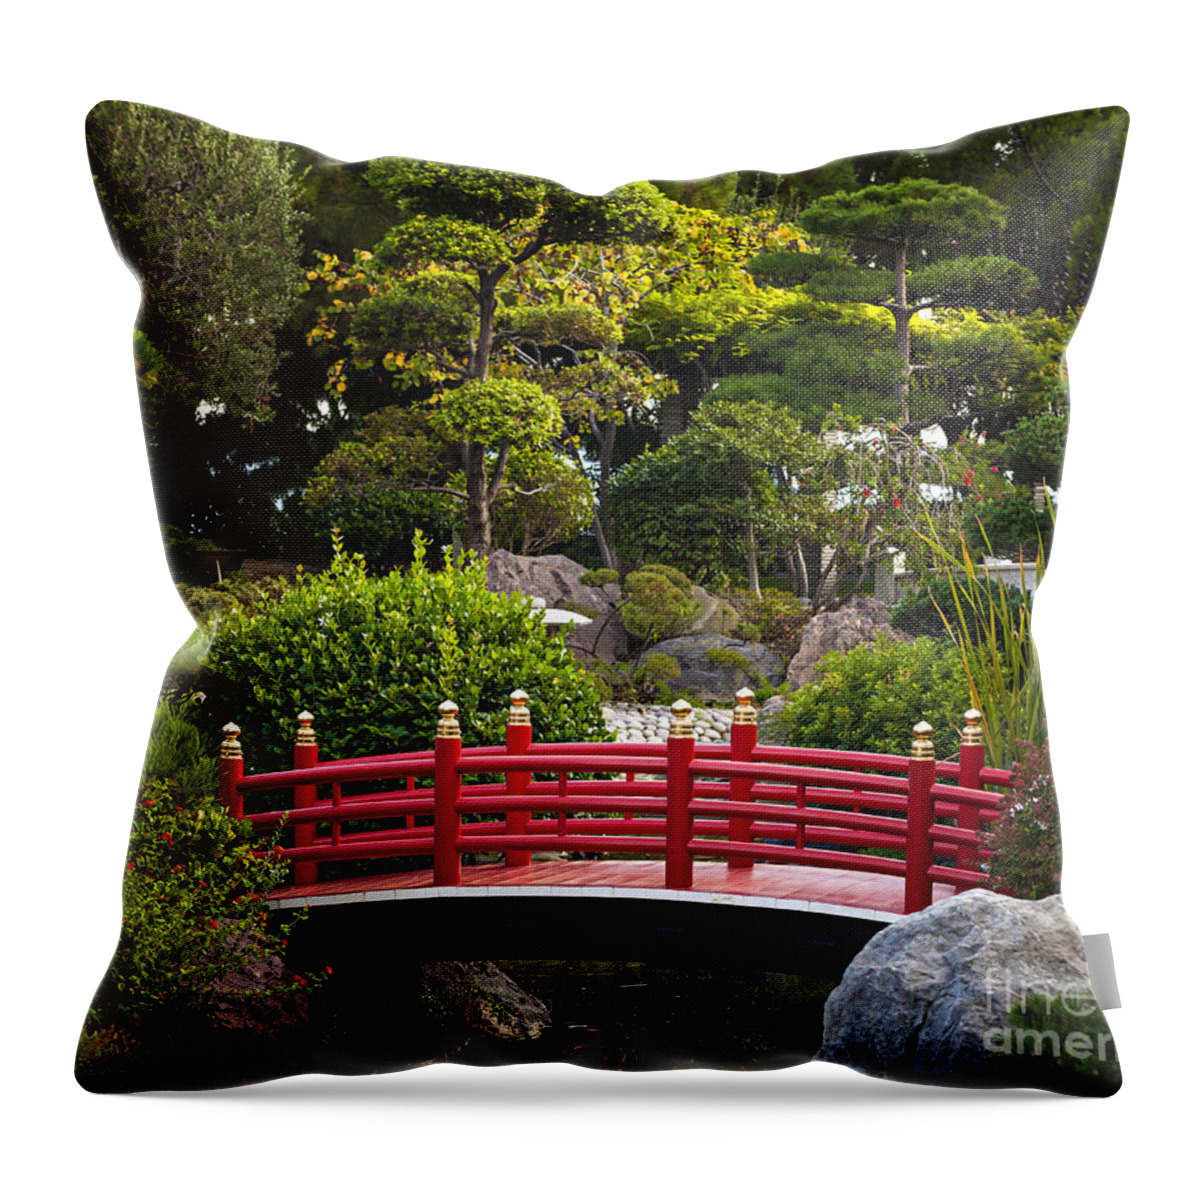 Japanese Throw Pillow featuring the photograph Red bridge in Japanese garden by Elena Elisseeva